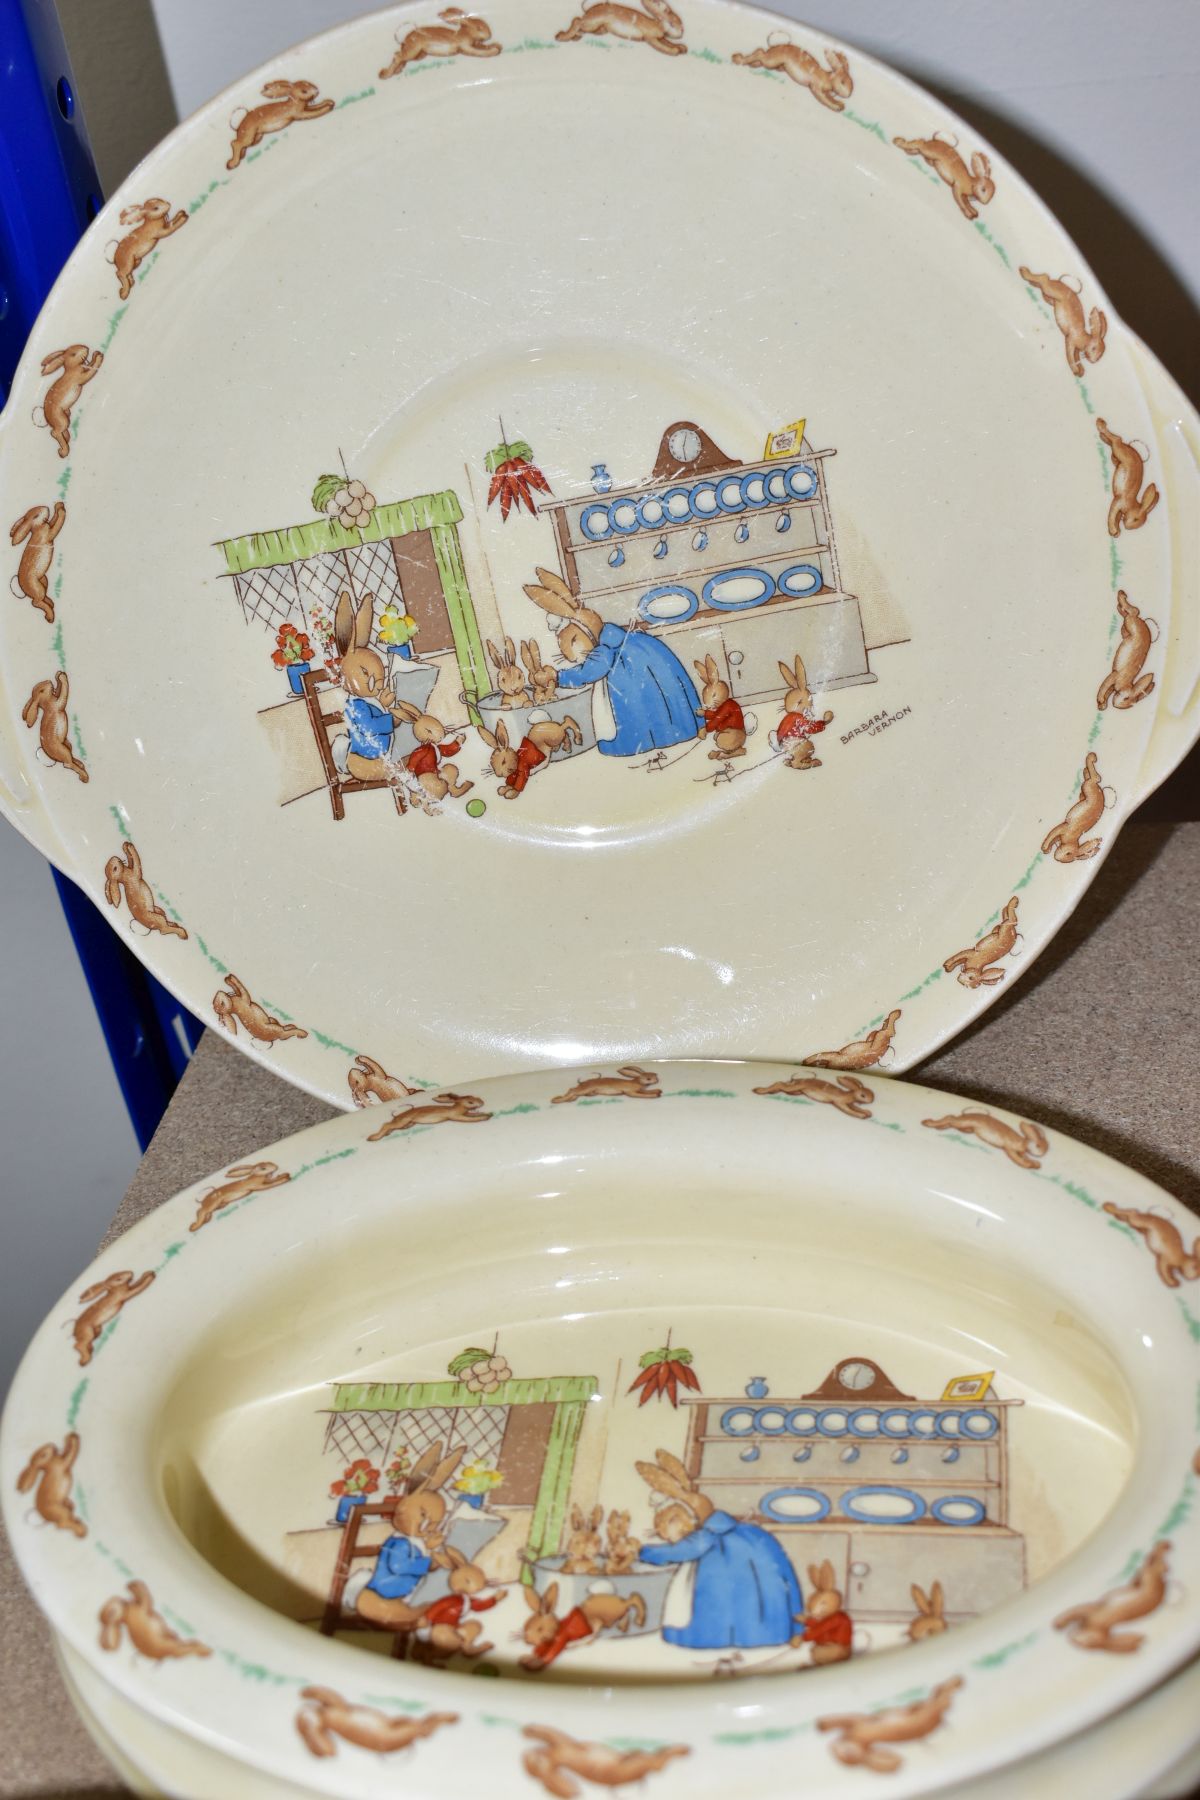 SIX PIECES OF ROYAL DOULTON BUNNYKINS EARTHENWARE TABLEWARES OF SCENES BY BARBARA VERNON AND - Image 5 of 13